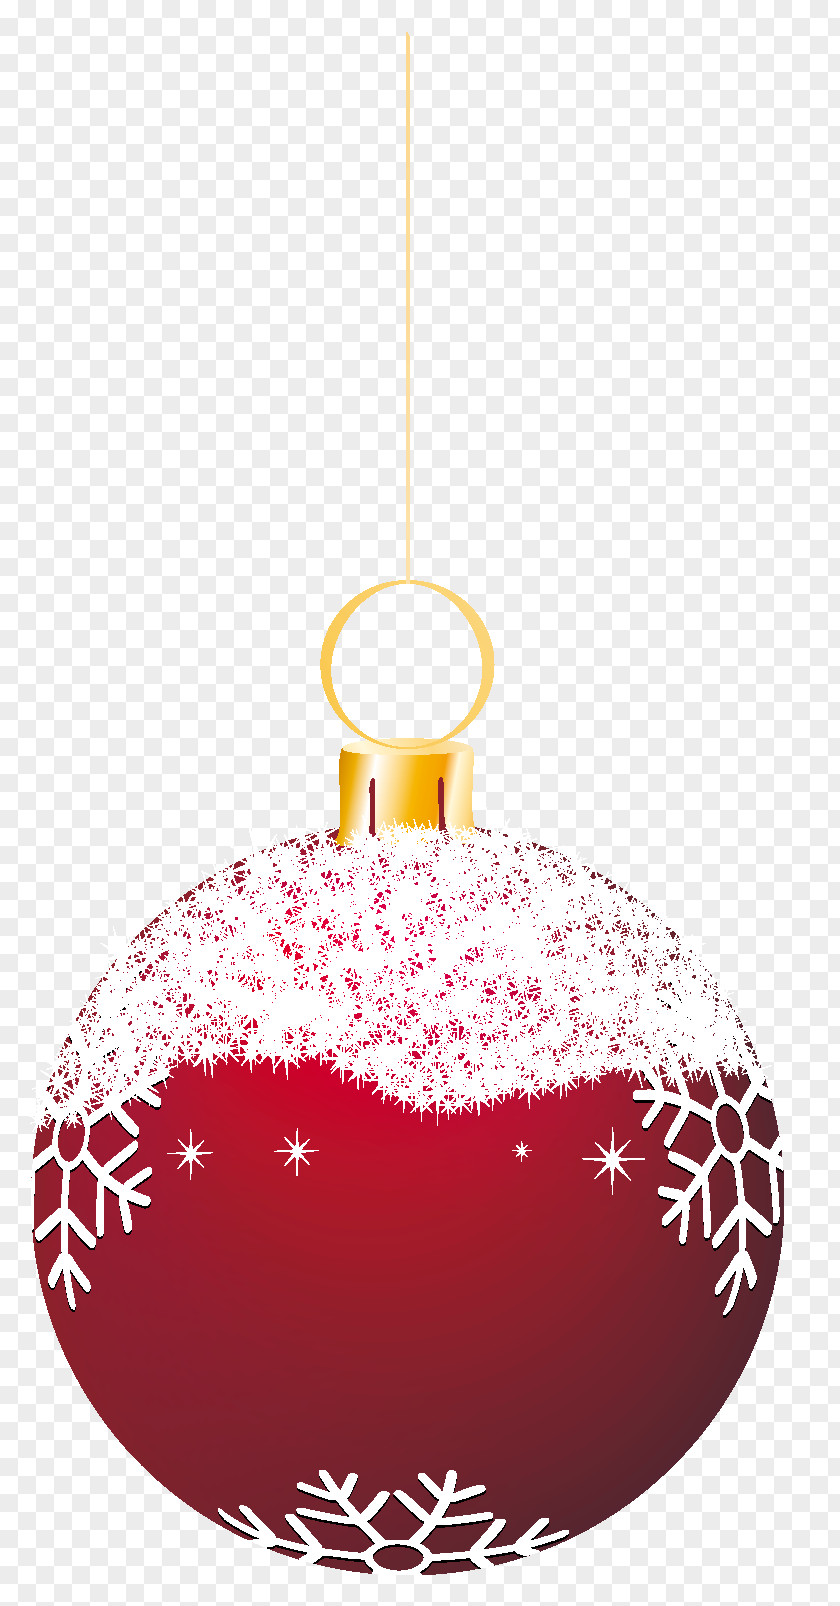 Christmas Ball Free Download Ornament Clip Art PNG